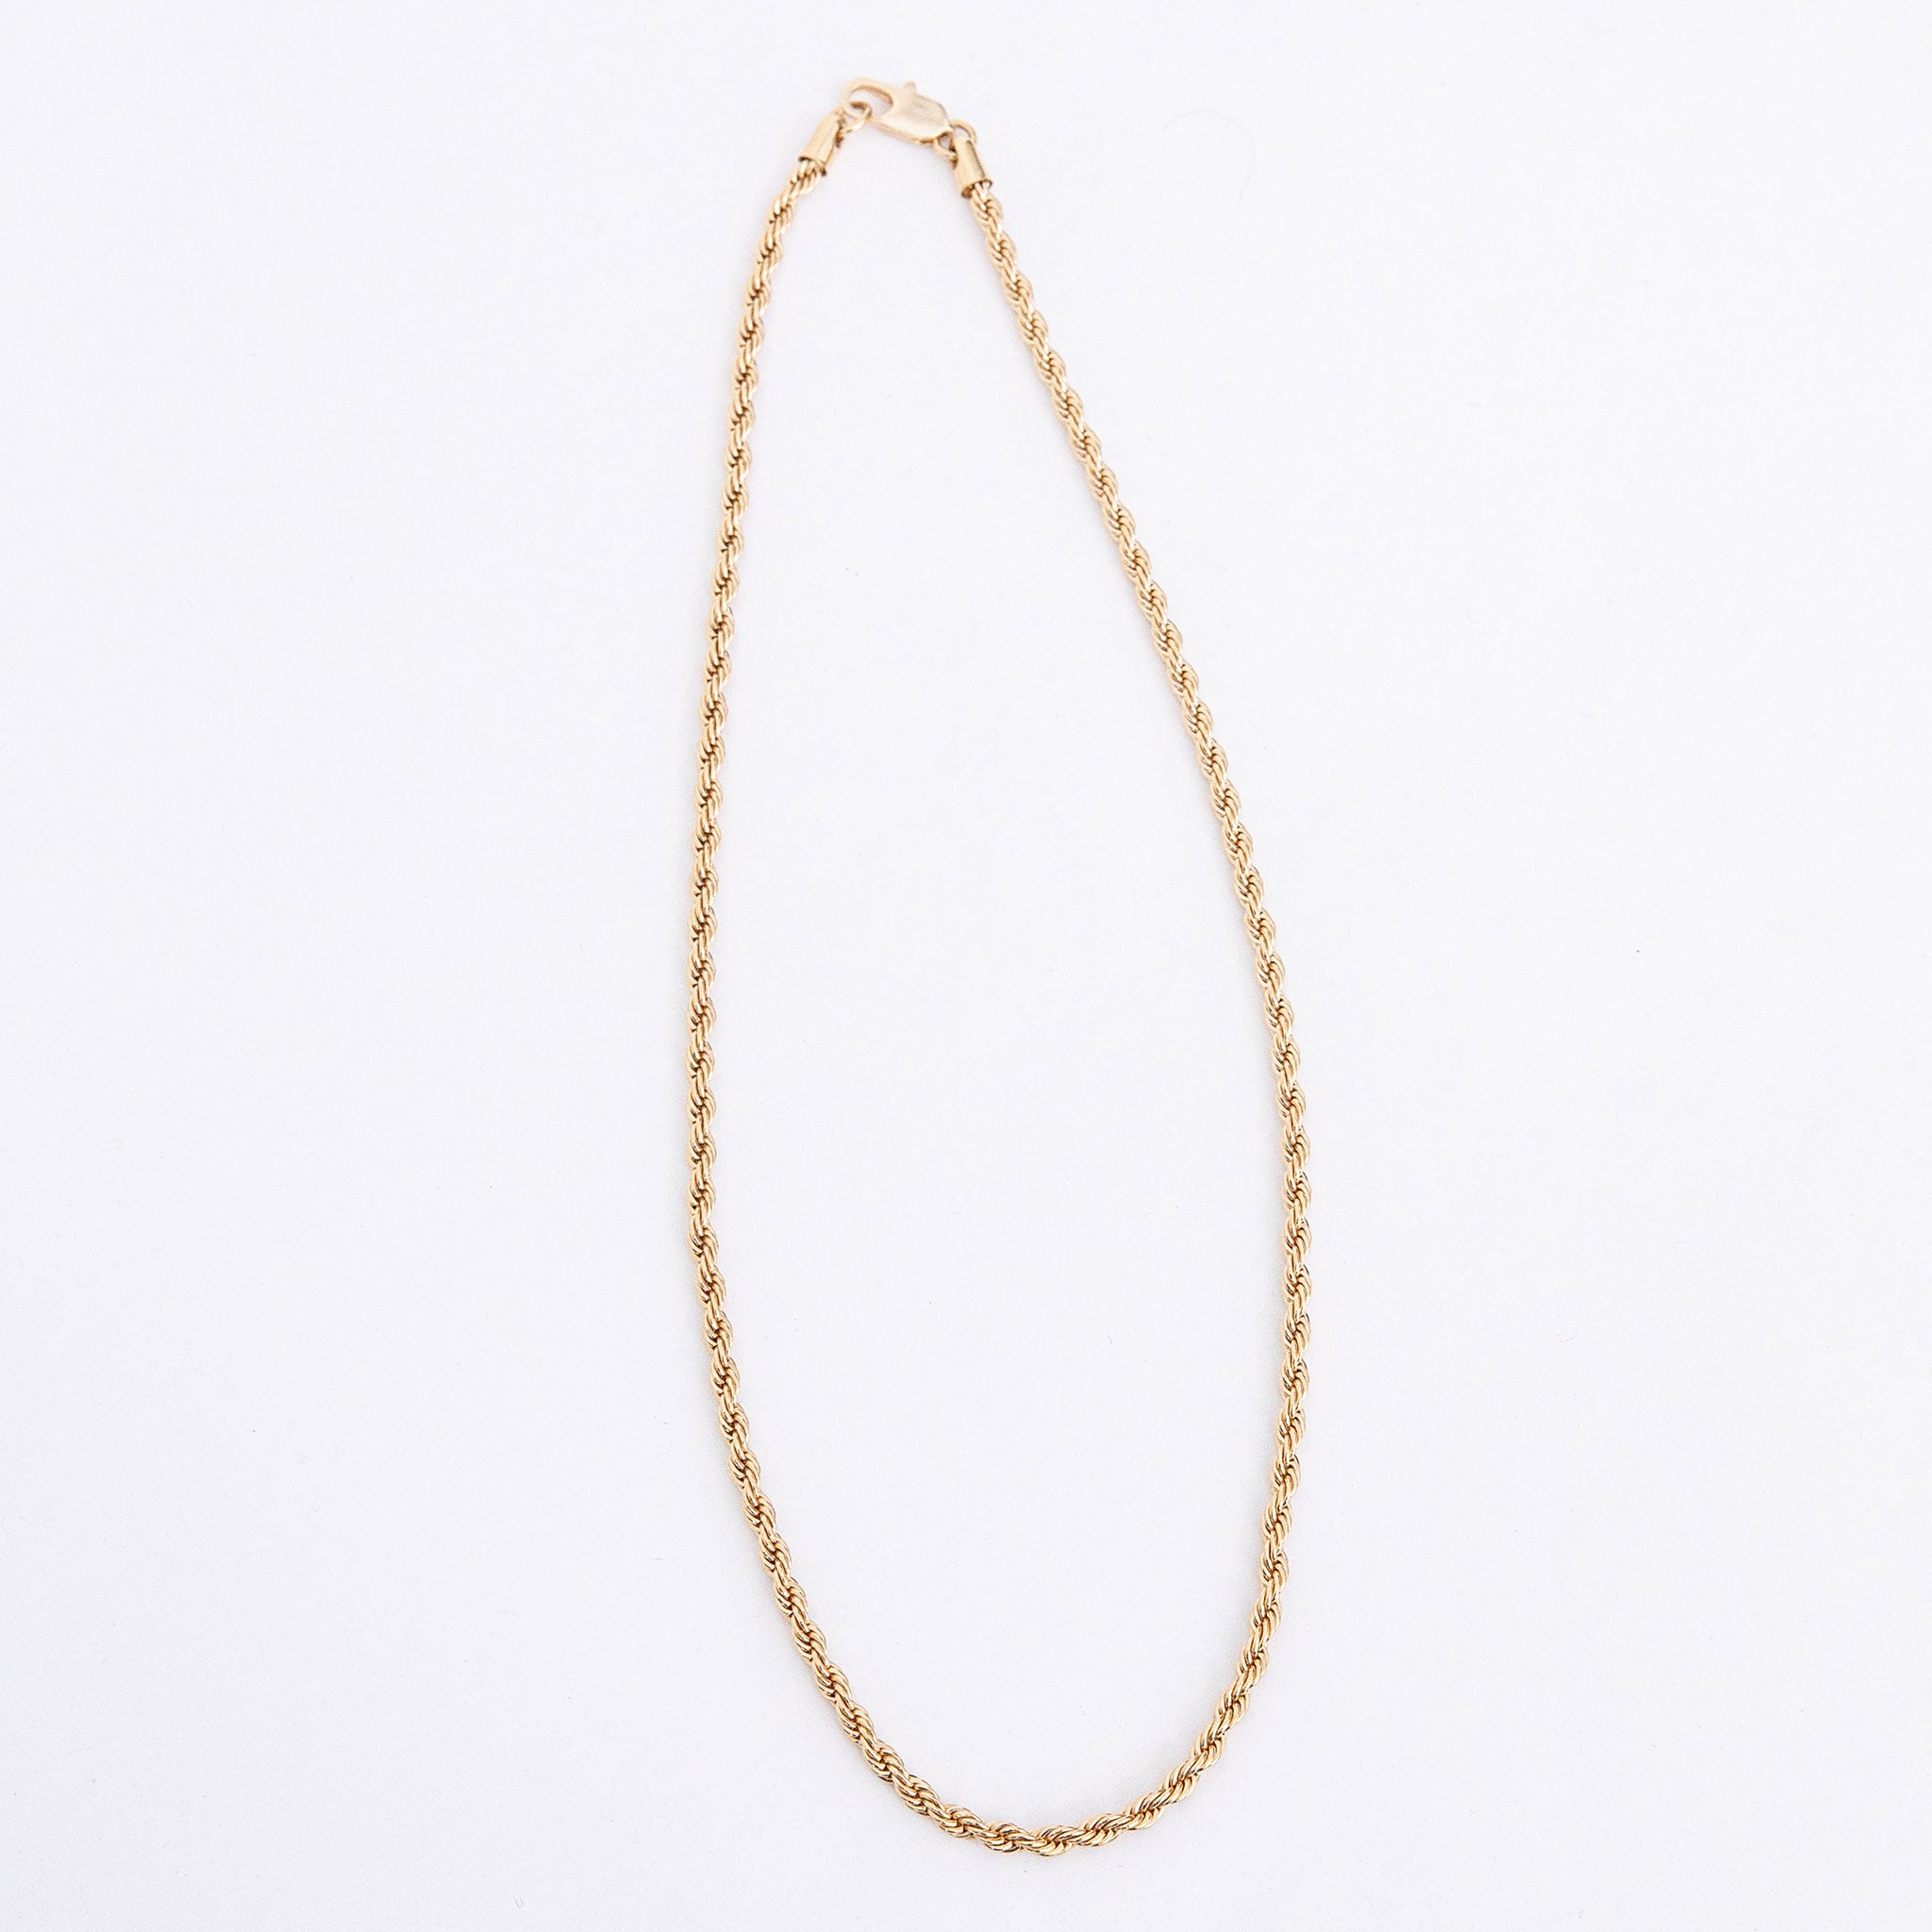 Close flat photo of the Rope Chain Necklace.